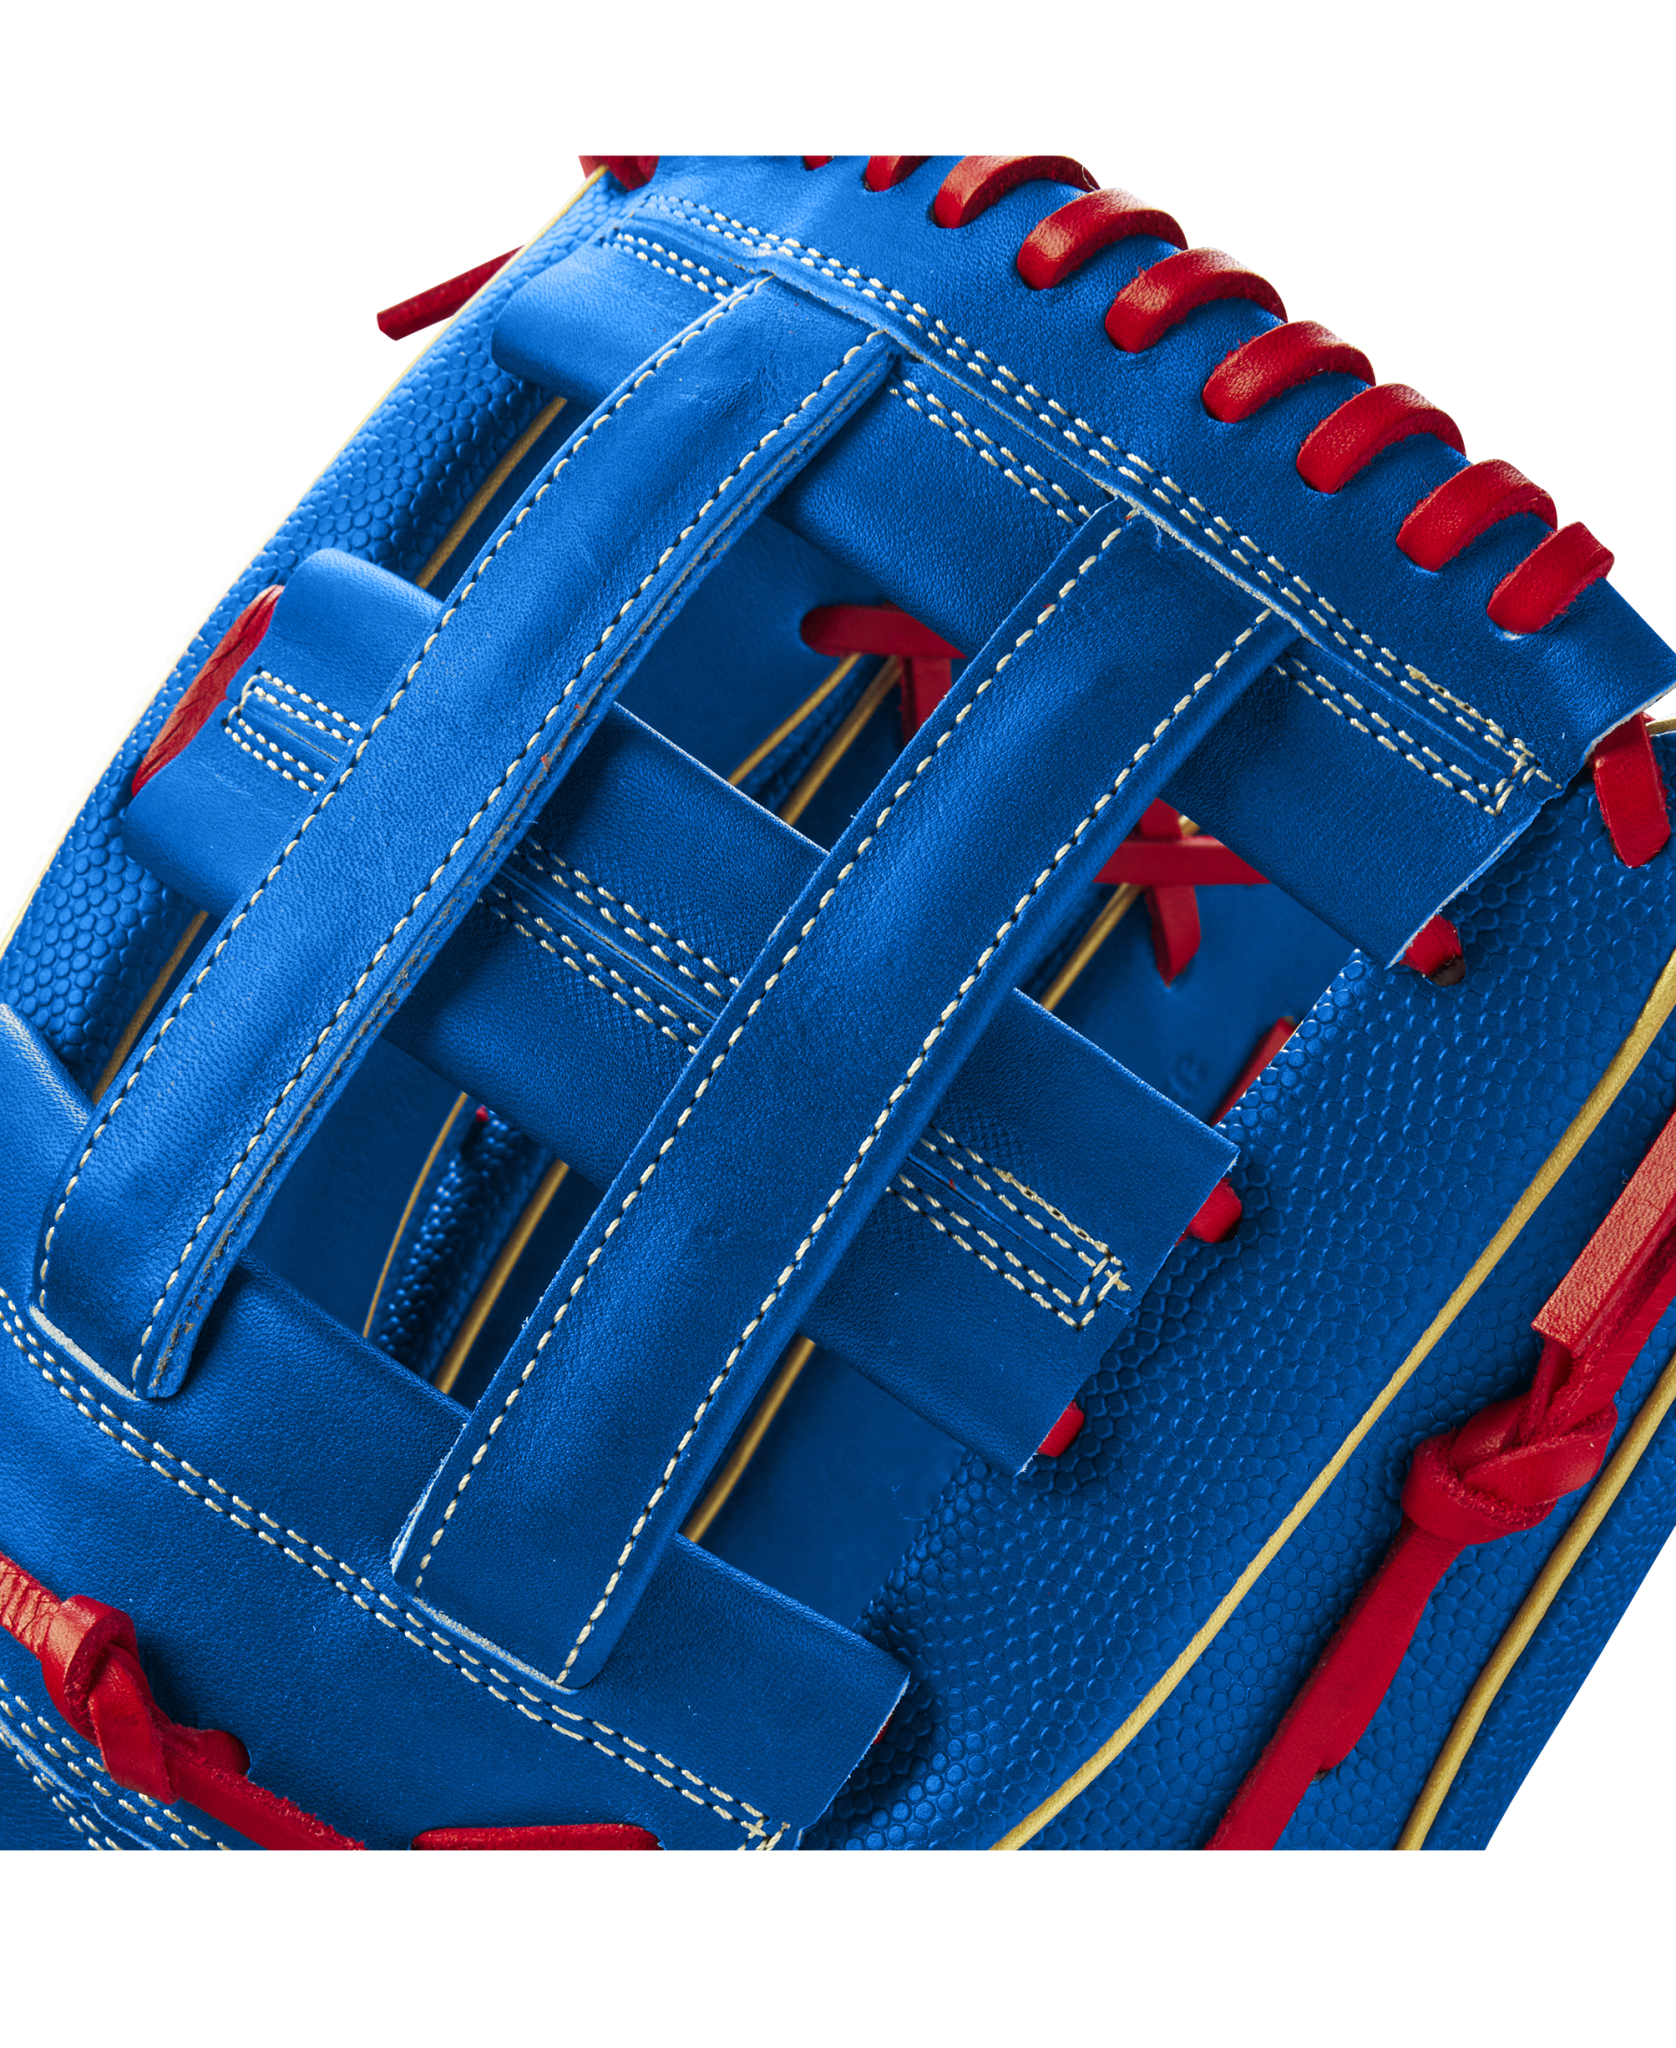 Wilson A2K MB50 Mookie Betts Game Model 12.5 Outfield Baseball Glove -  Right Hand Throw